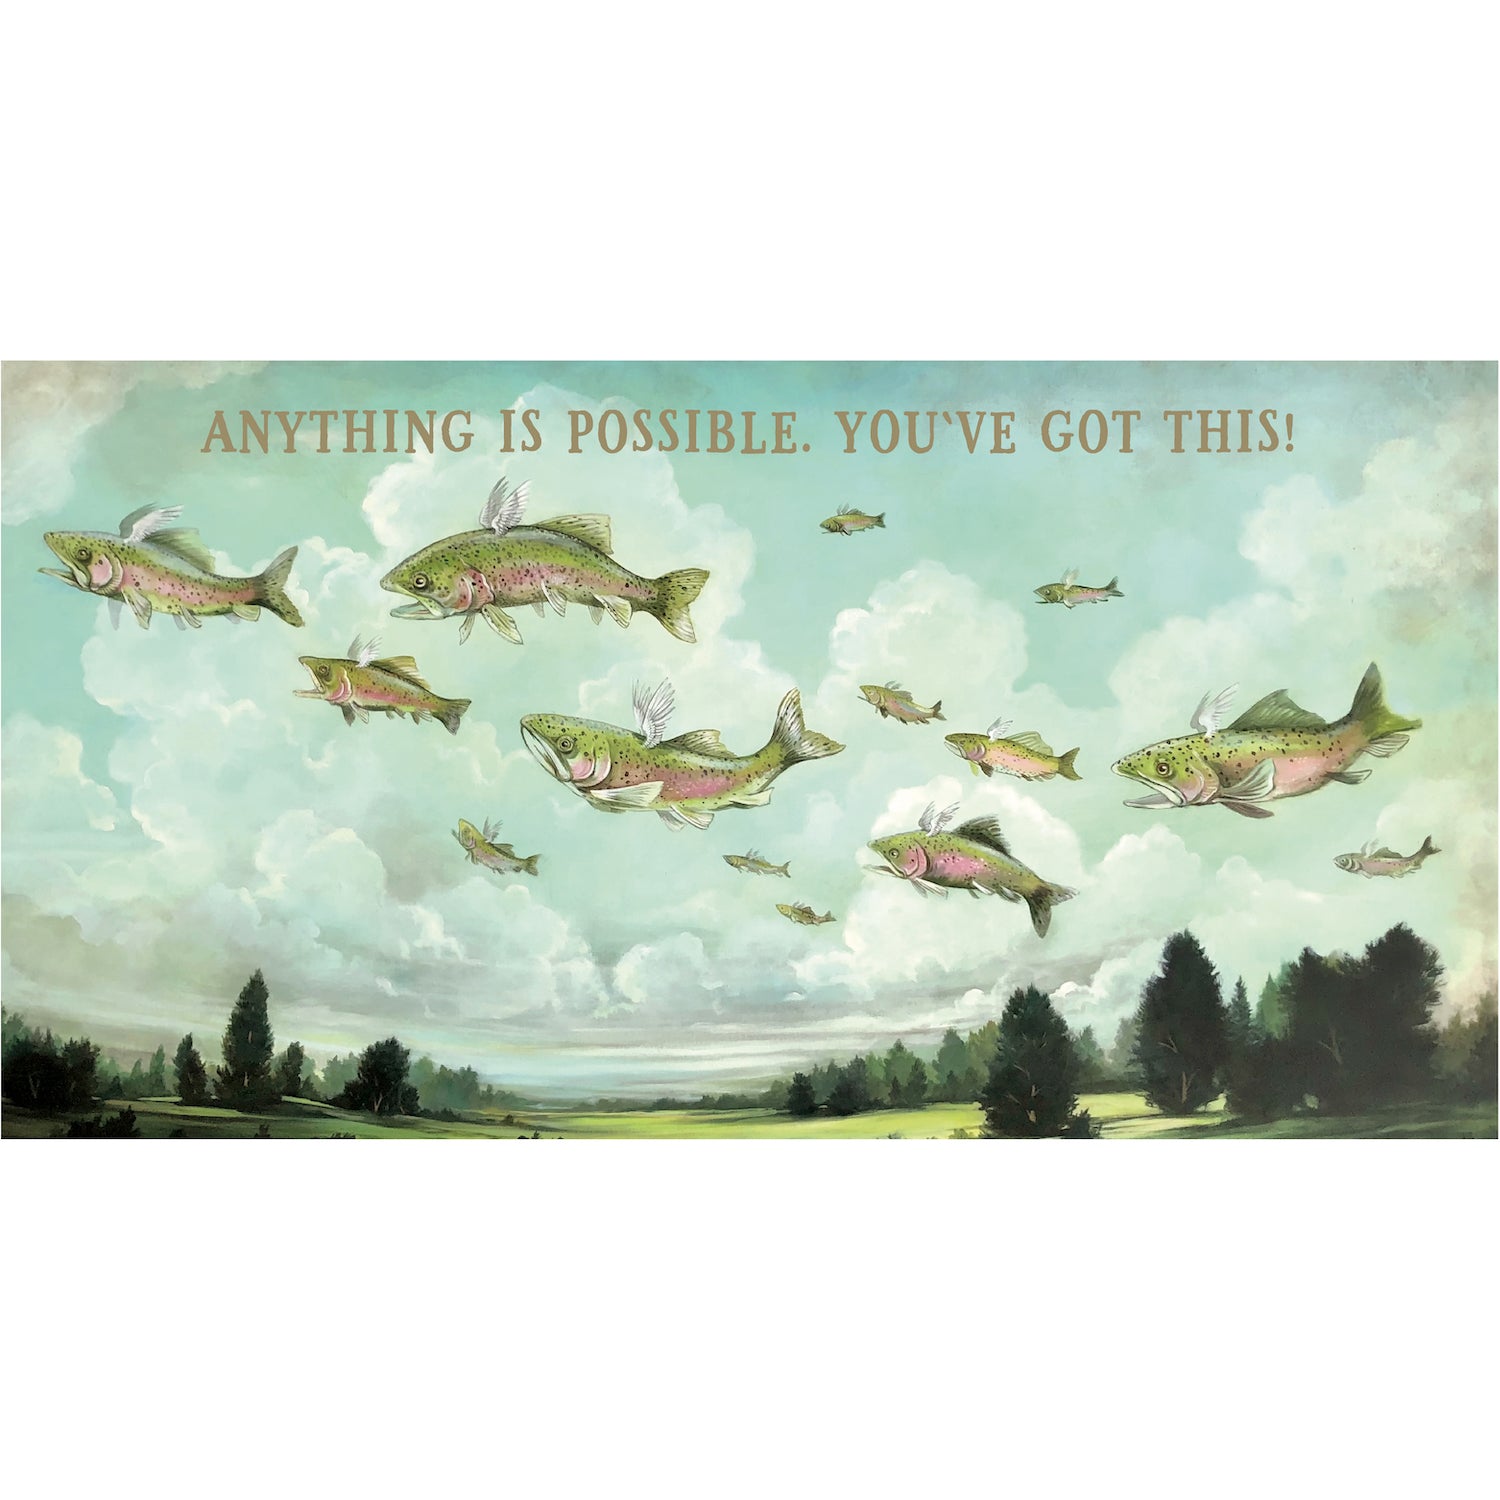 In a world of fairytales and folklore, where paintings come to life, anything is possible with the Flying Fish Card from Hester &amp; Cook. You&